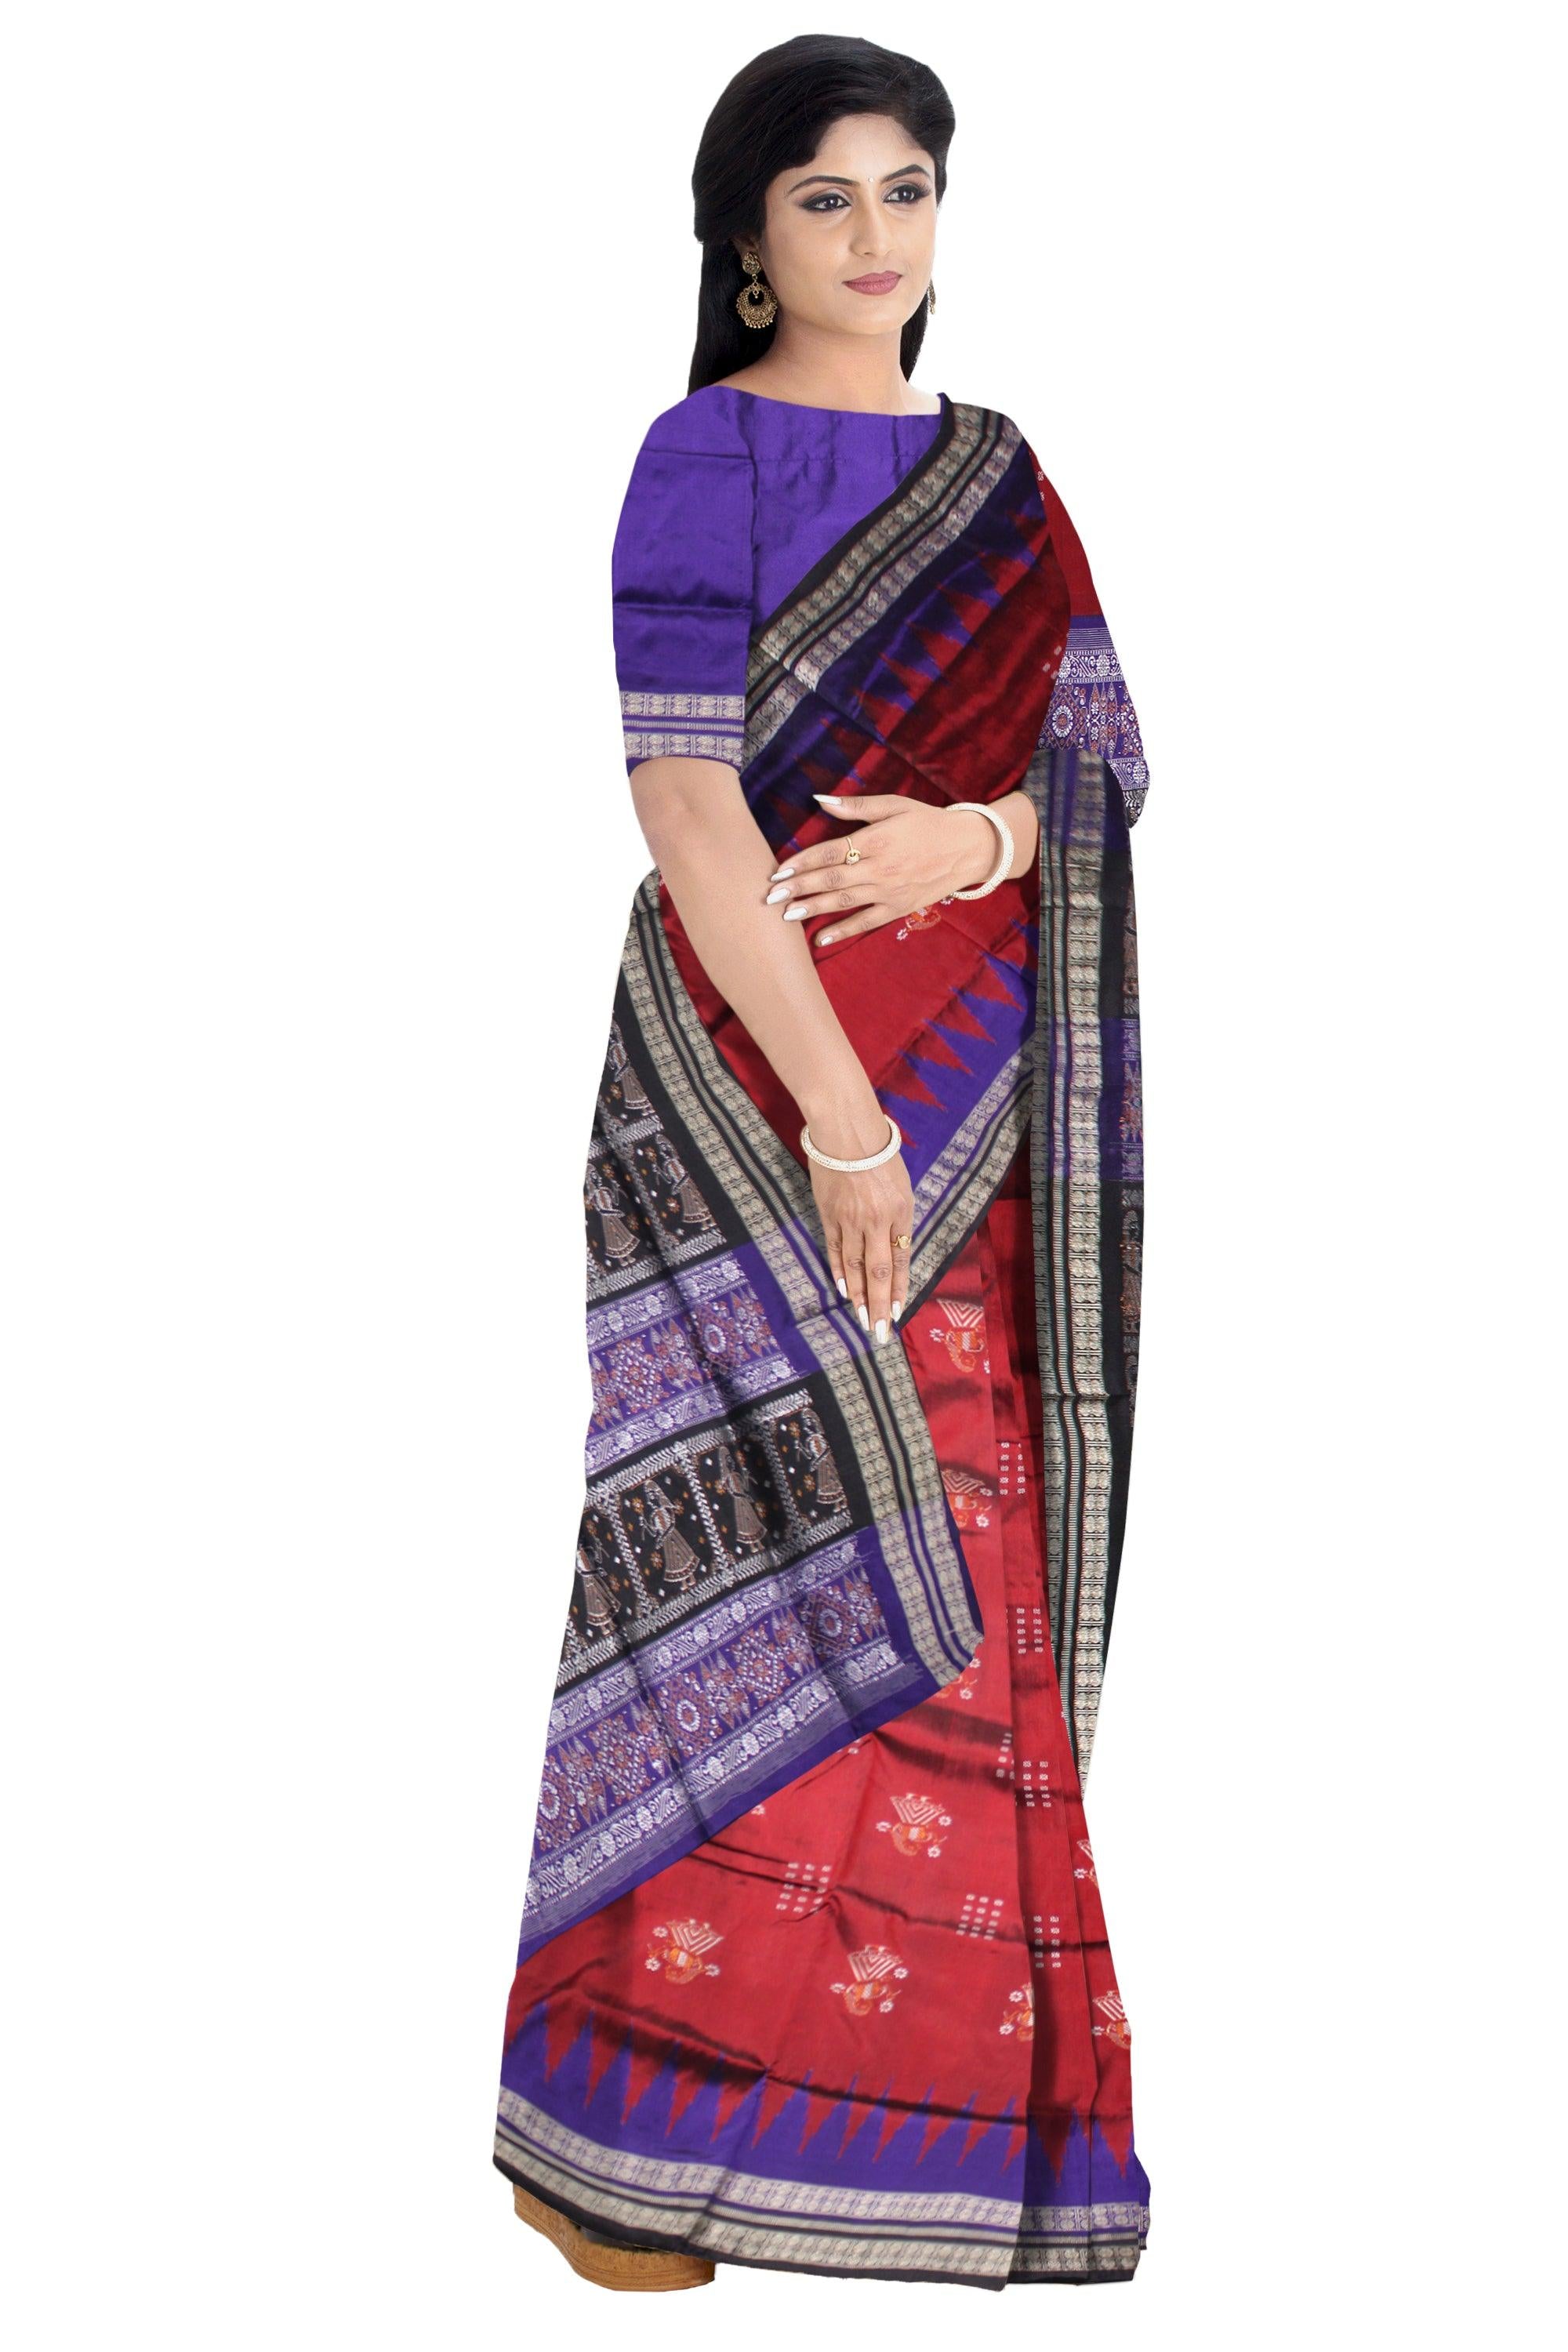 BODY DOLL PRINT  PATA SAREE IN MAROON AND BLUE COLOR, ATTACHED WITH BLOUSE PIECE. - Koshali Arts & Crafts Enterprise